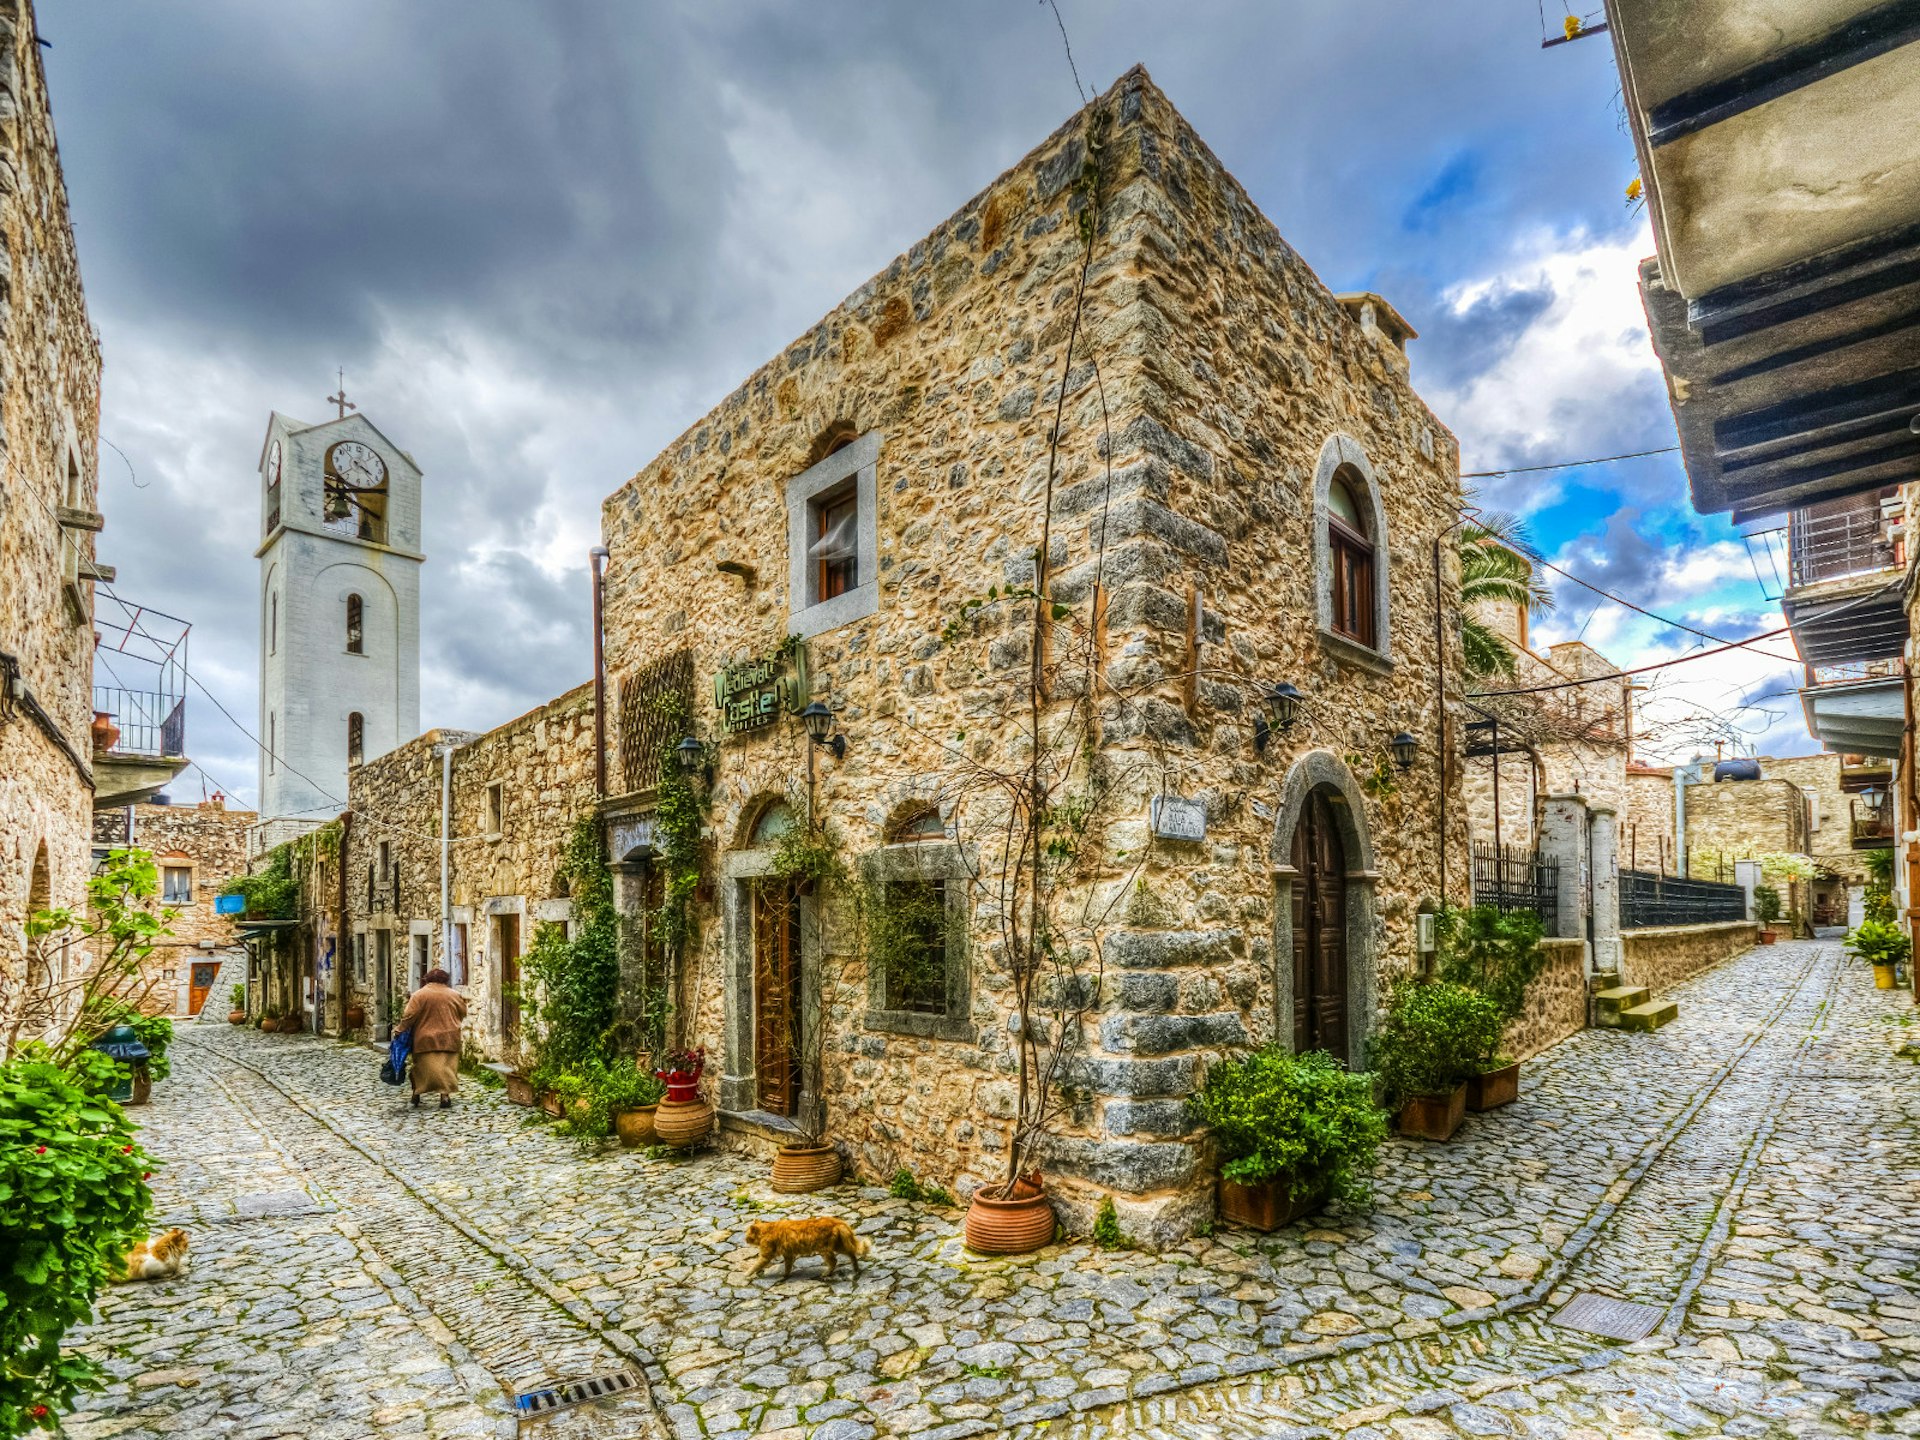 The cobbled lanes of the medieval village of Mesta on Chios island © Nejdet Duzen / Shutterstock